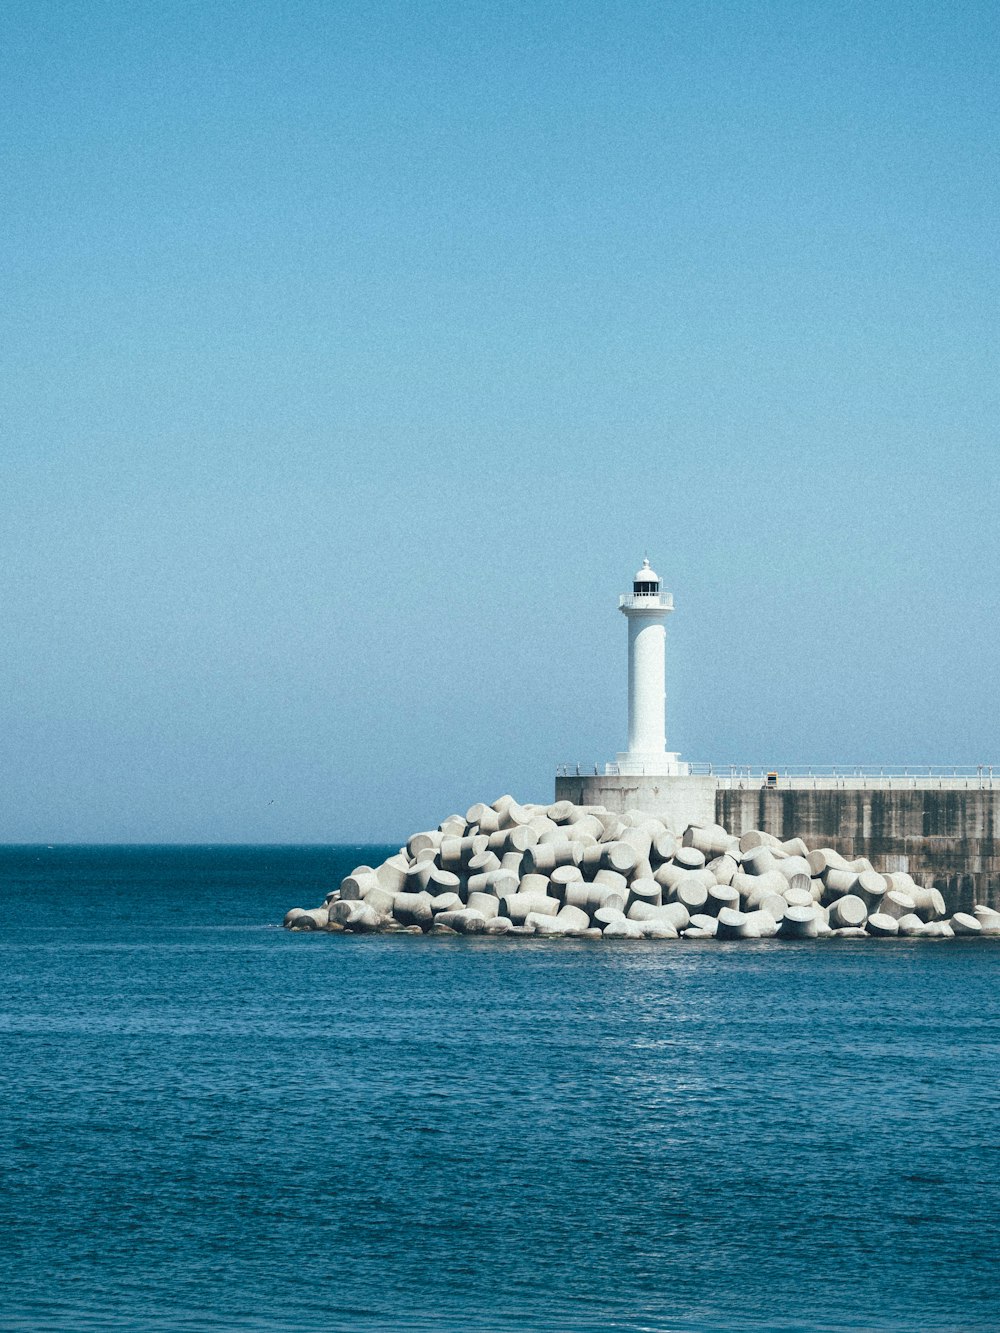 white lighthouse on gray rock formation near body of water during daytime